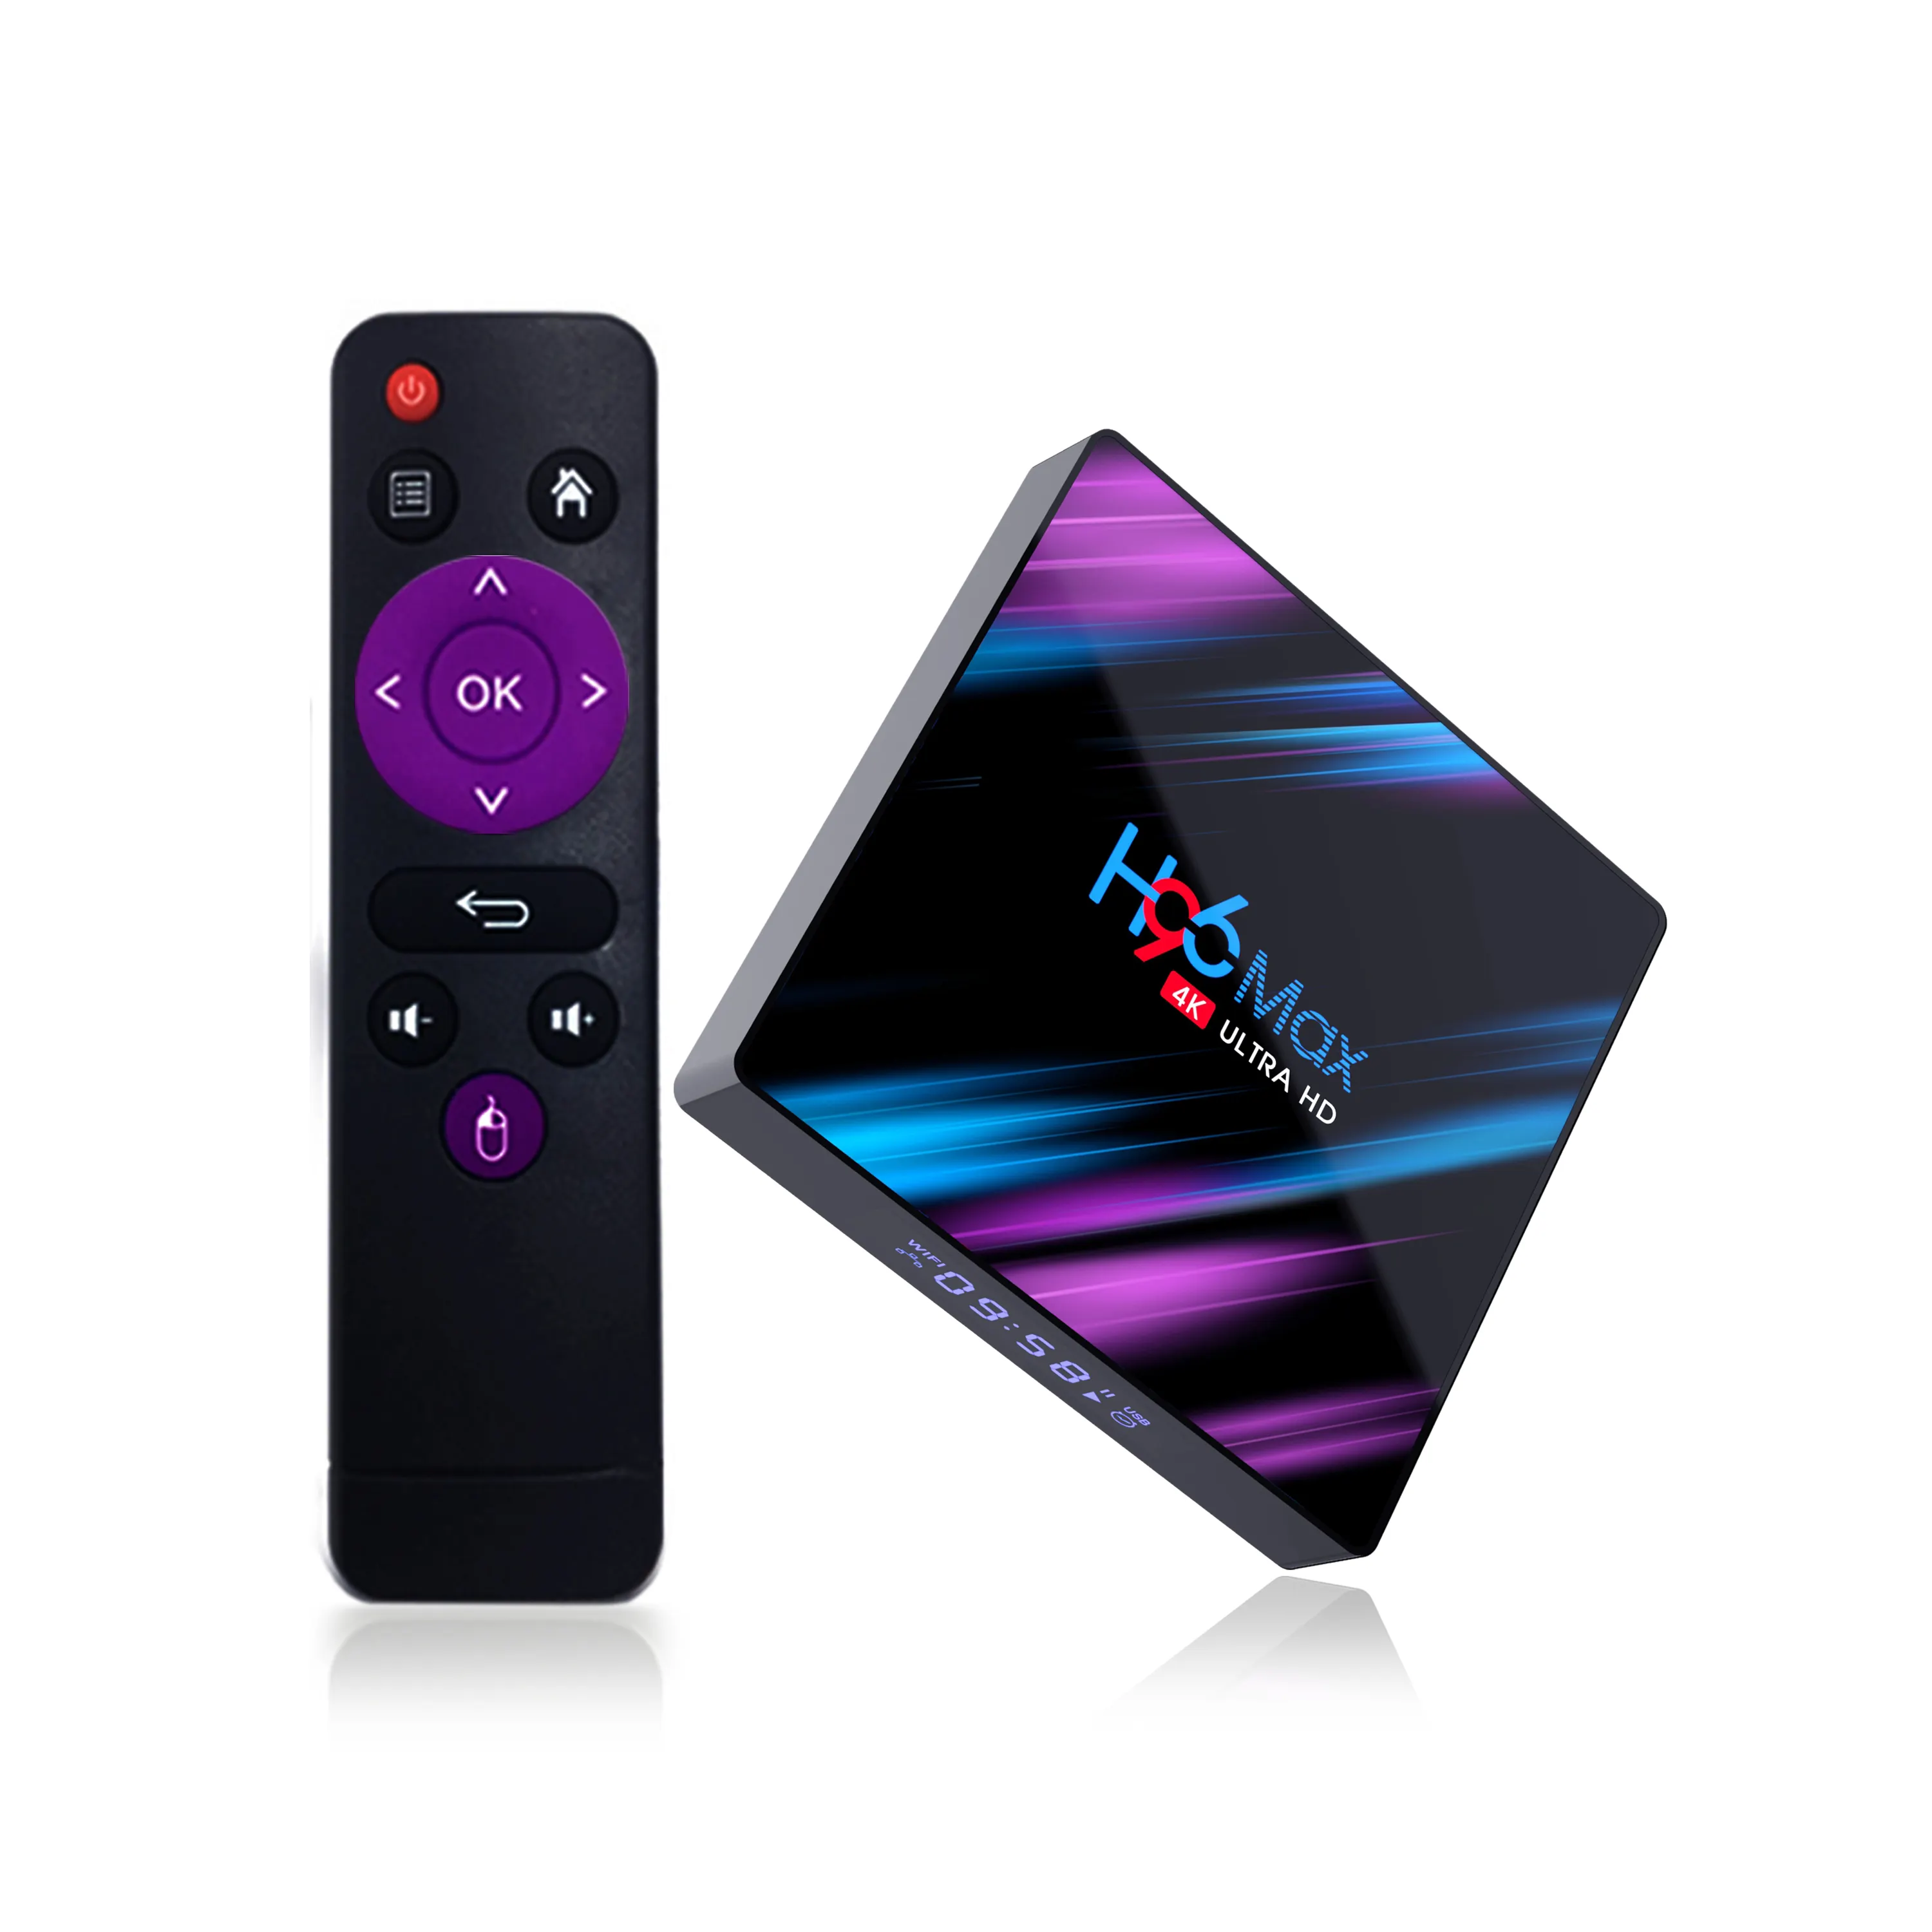 2020 nuovo arrivo Streaming 2G 4G Ram 32G 64G Rom Wifi Smart HD Set Top Box ricevitore TV Android TV Box H96max 3318